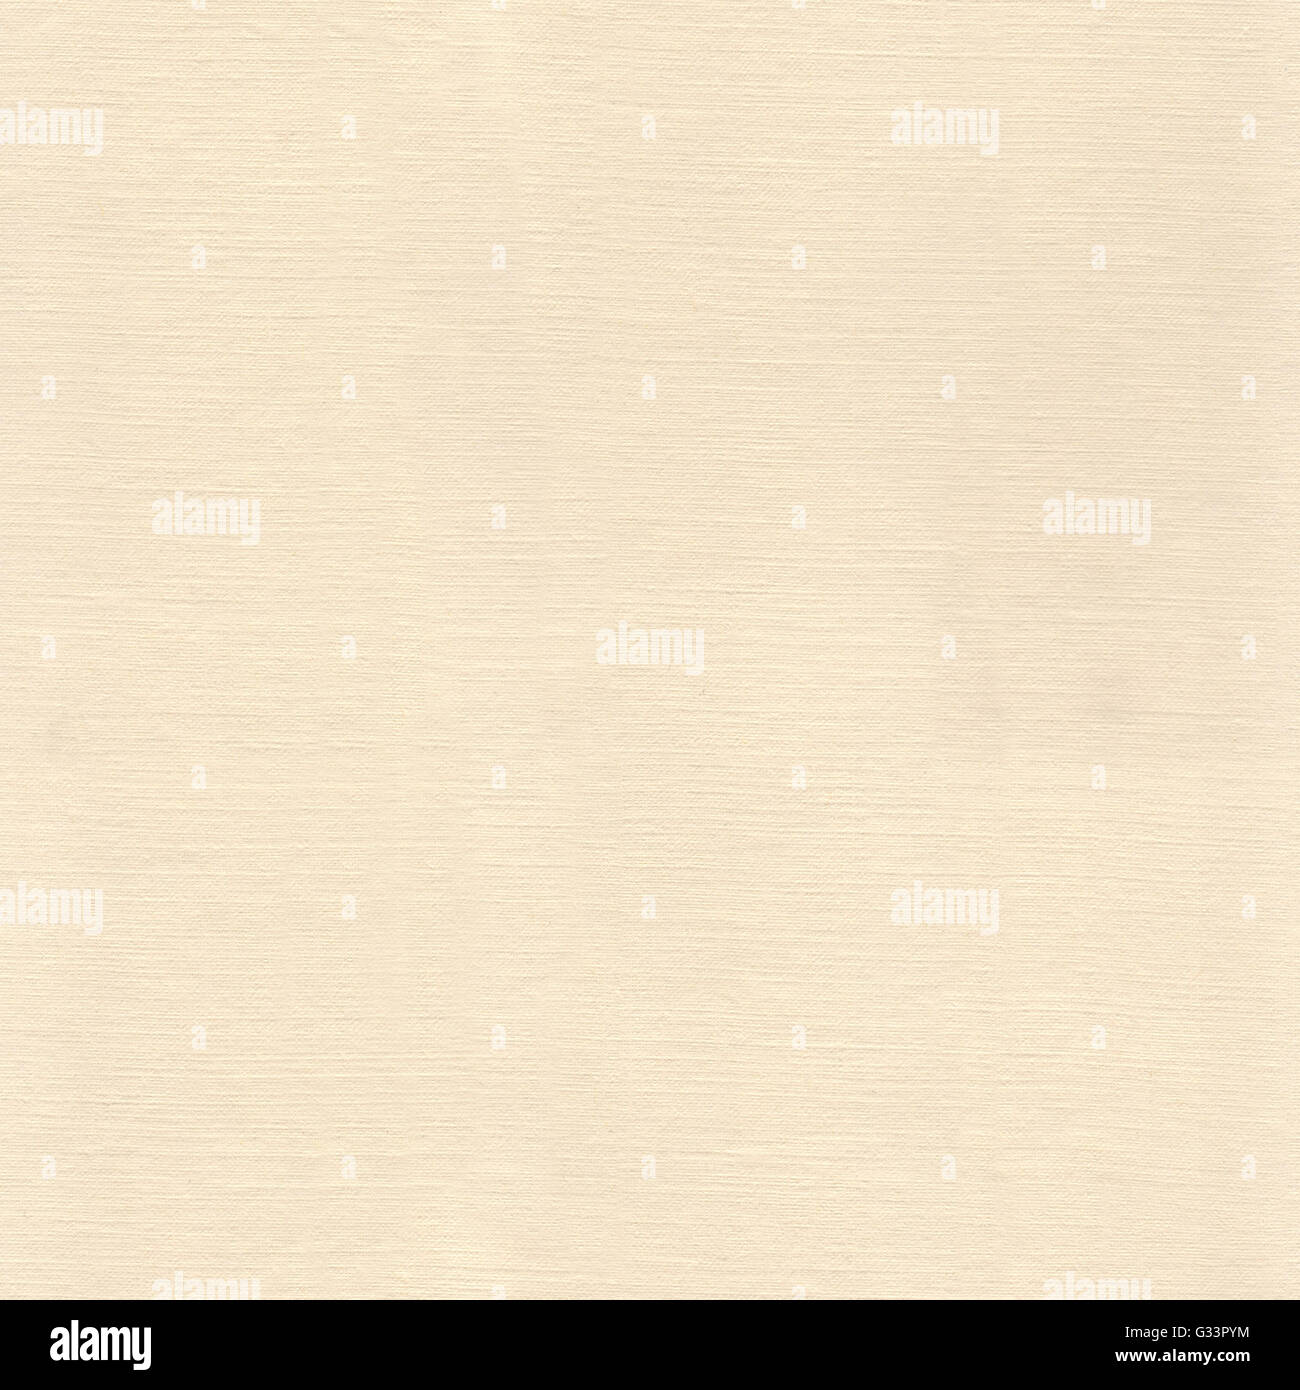 Linen paper pattern for scrapbooking and designs Stock Photo